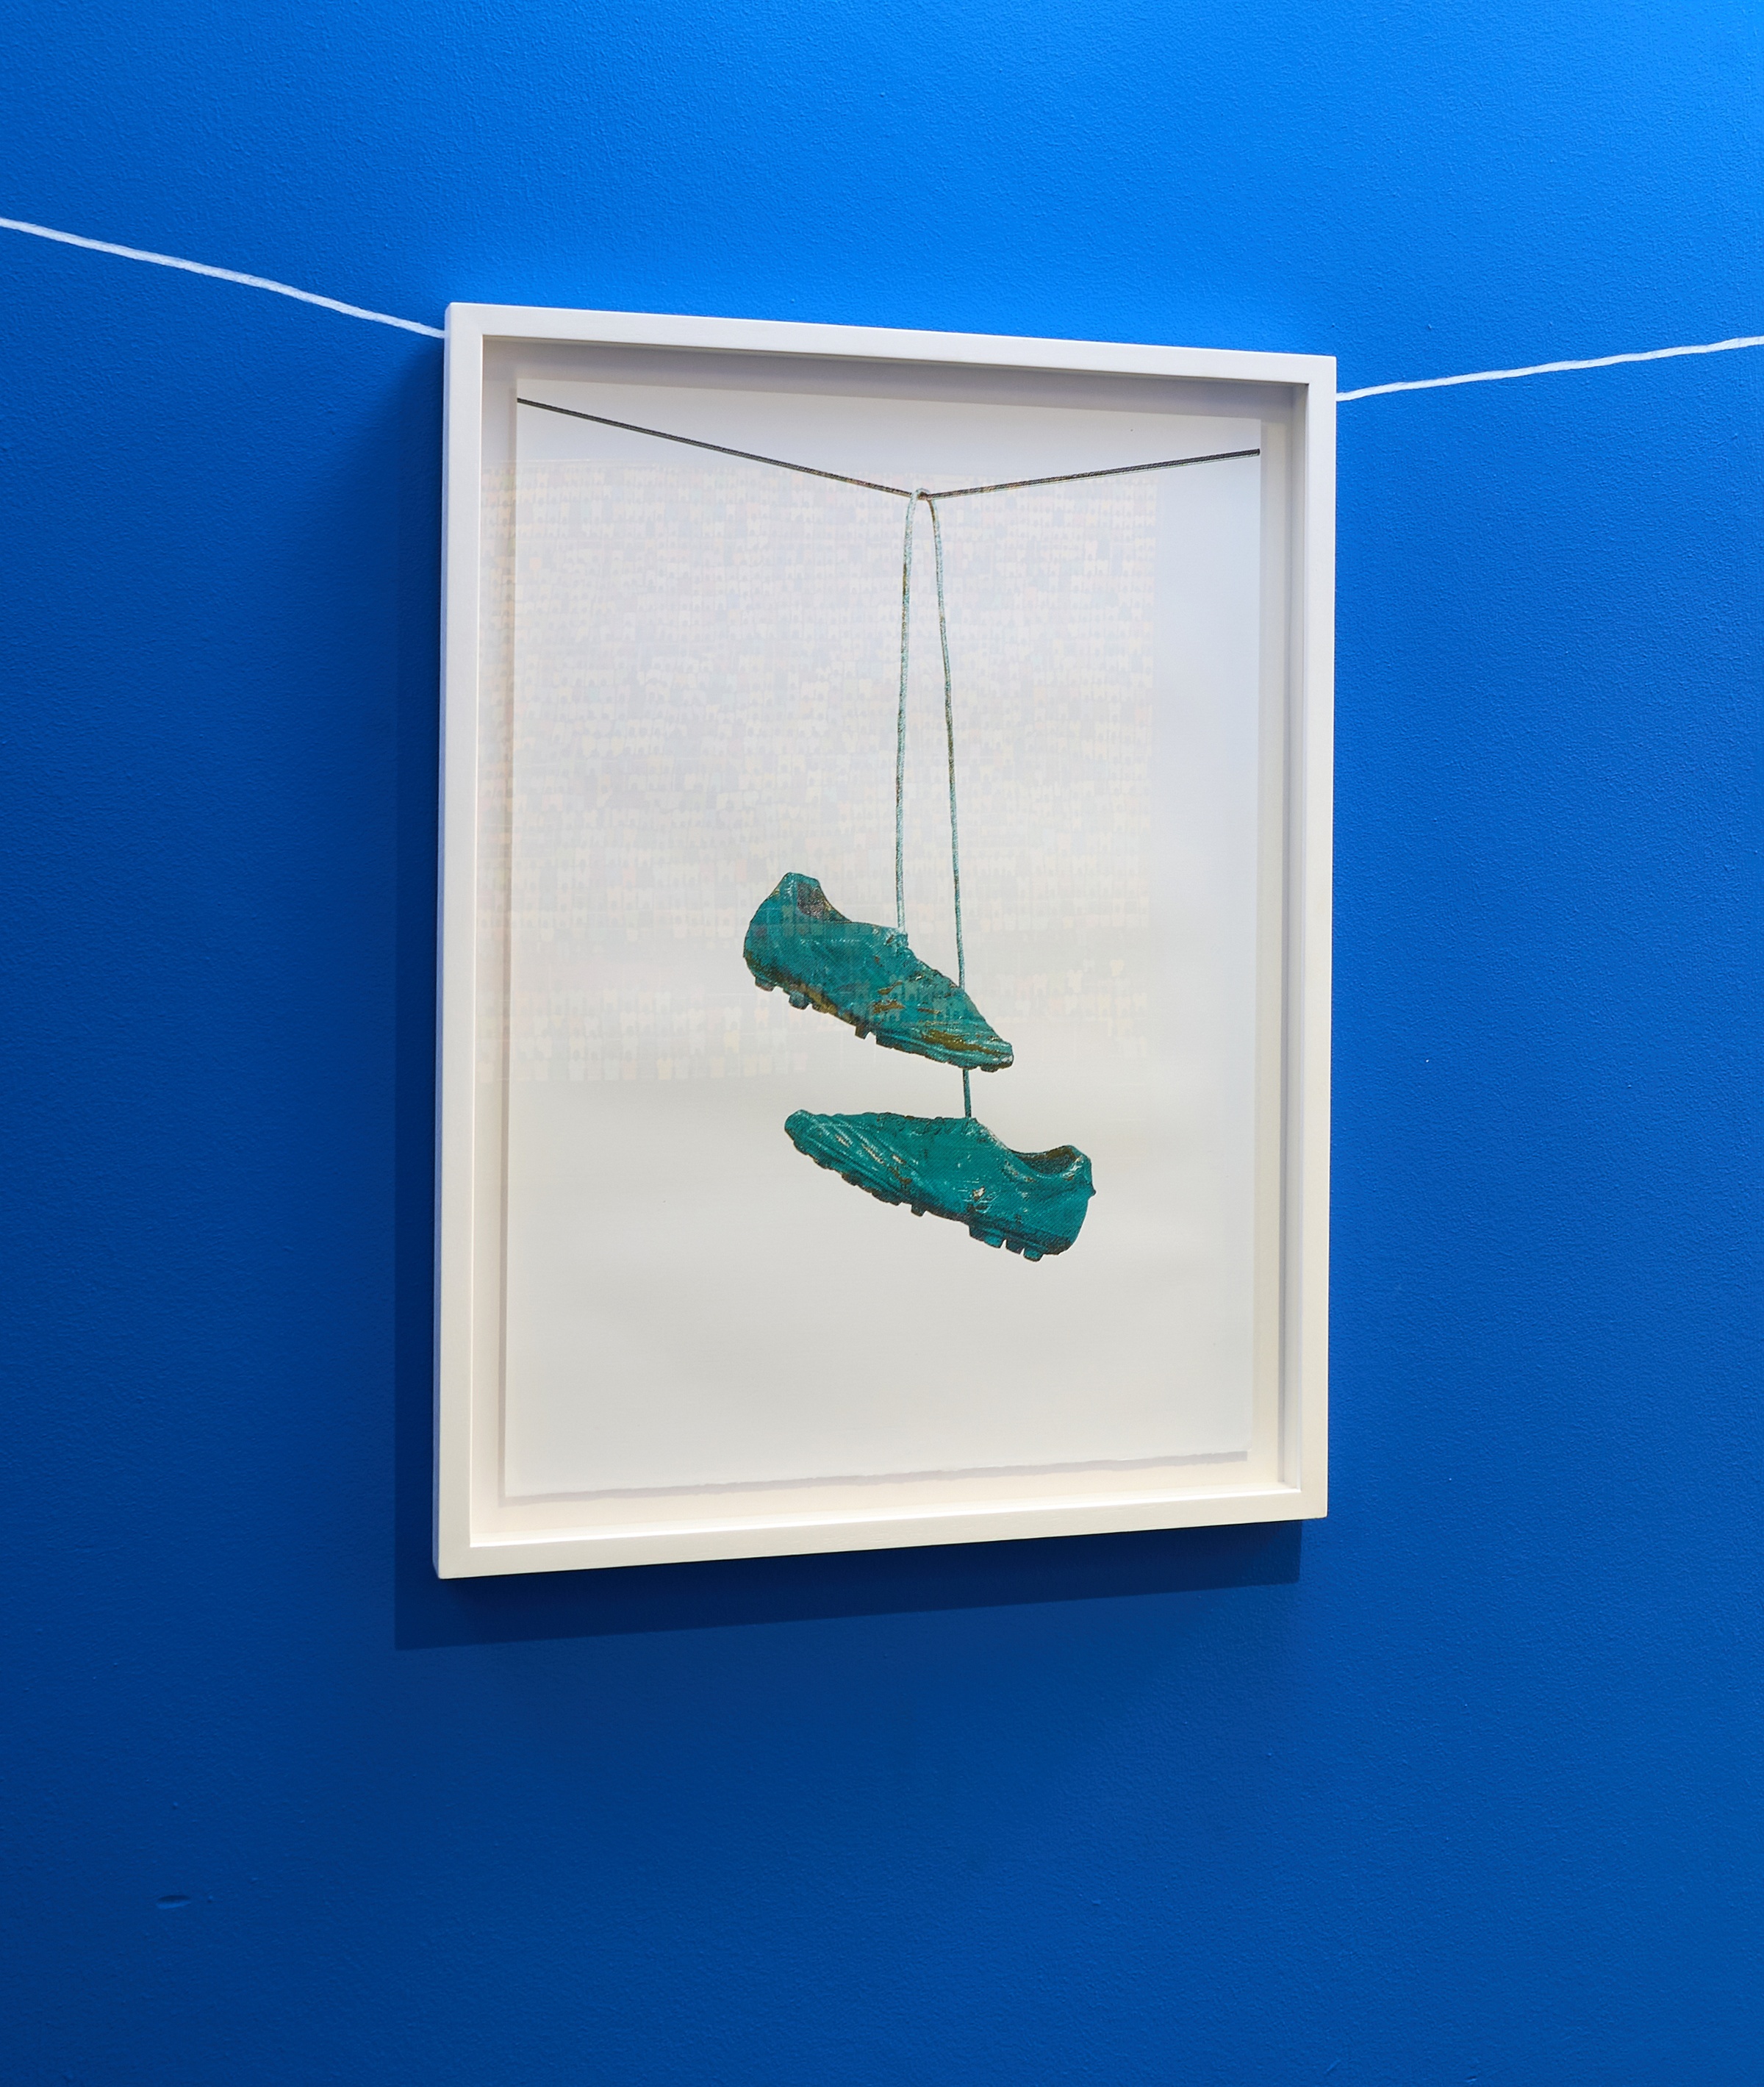 Haroon Gunn-Salie and Aline Xavier's colour screen print 'On the line' depicts a pair of soccer boots suspended from a line.
